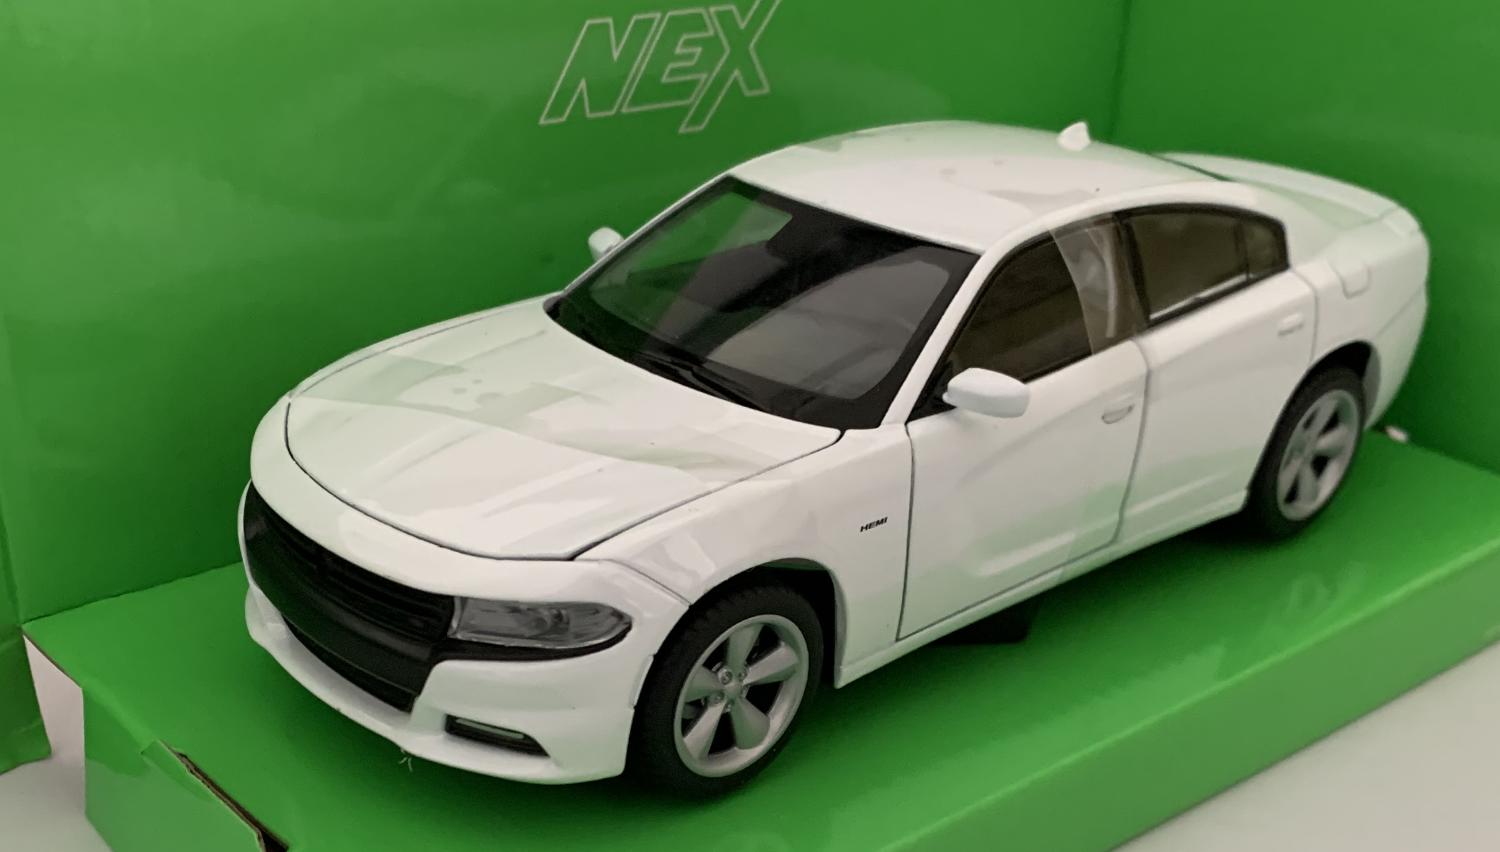 Dodge Charger R/T 2016 in white 1:24 scale model car from Welly, WEL24079